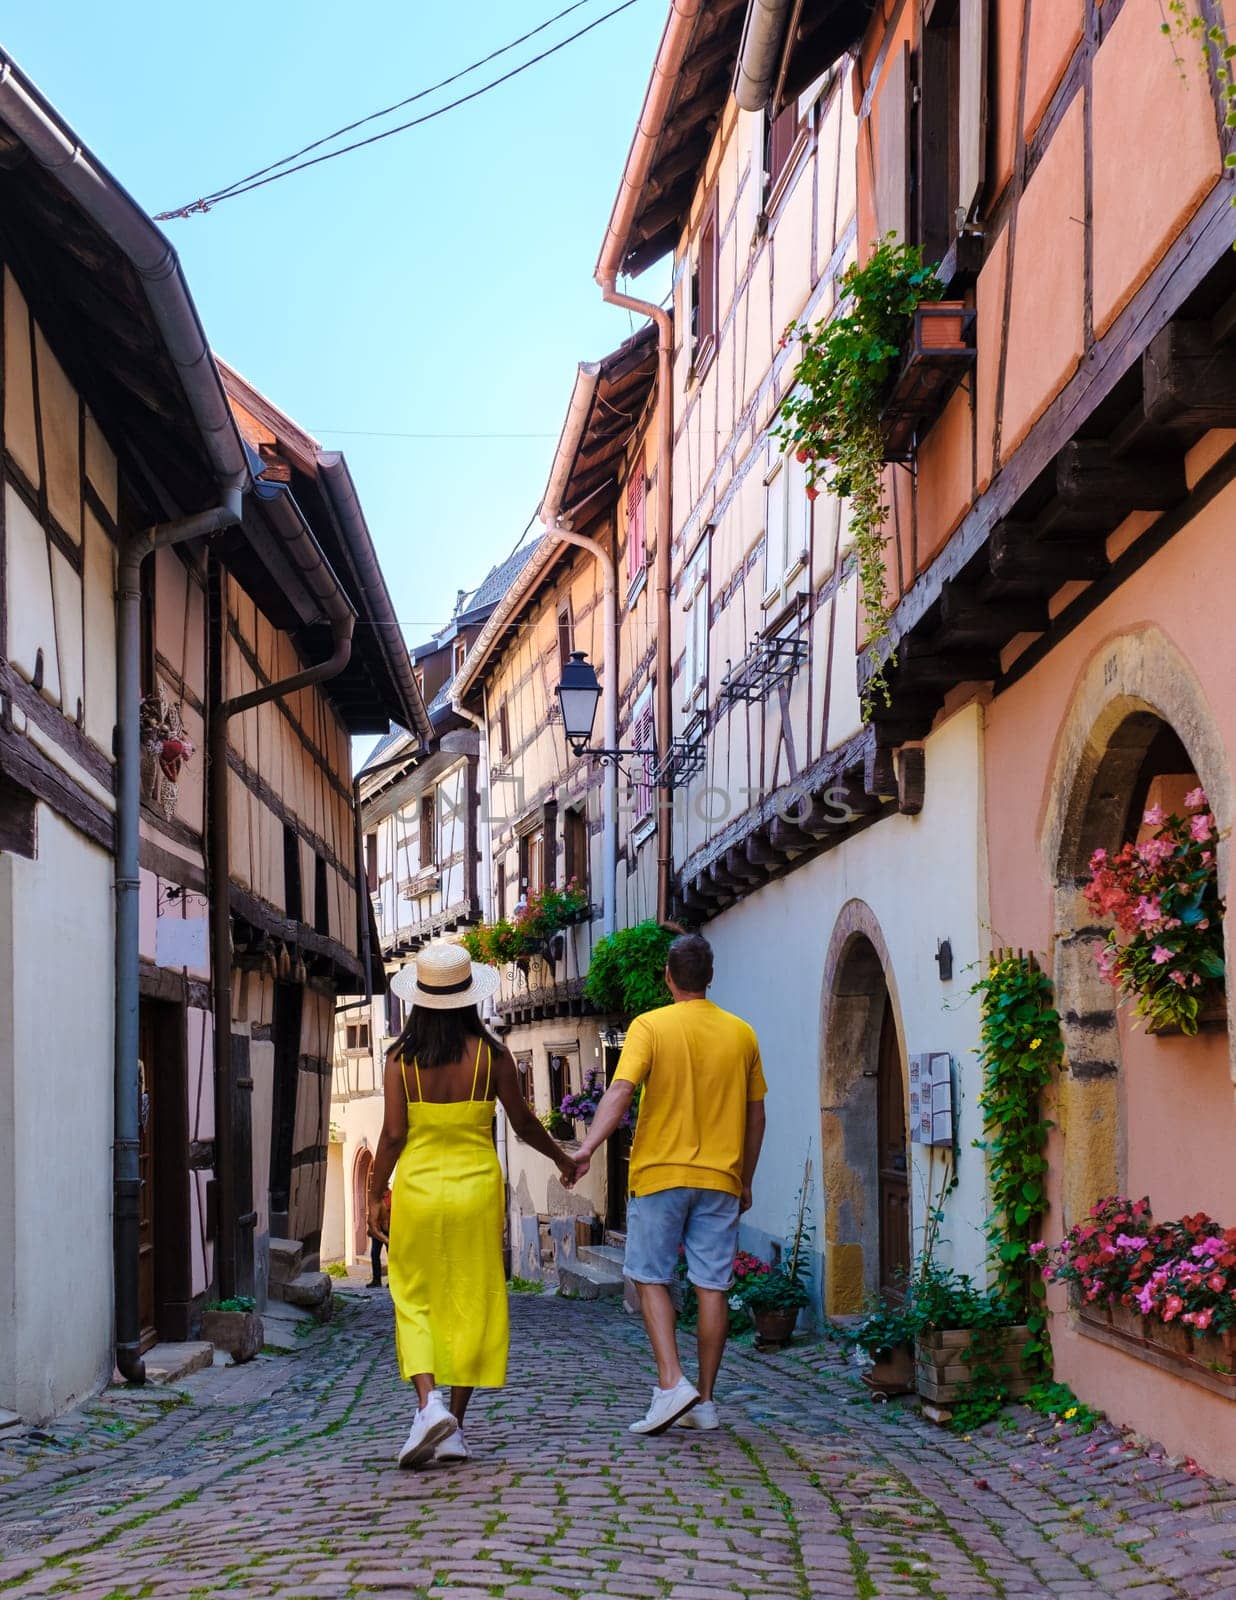 A couple of men and women on vacation in Eguisheim France Beautiful view of the colorful romantic city of Eguisheim near Colmar during summer